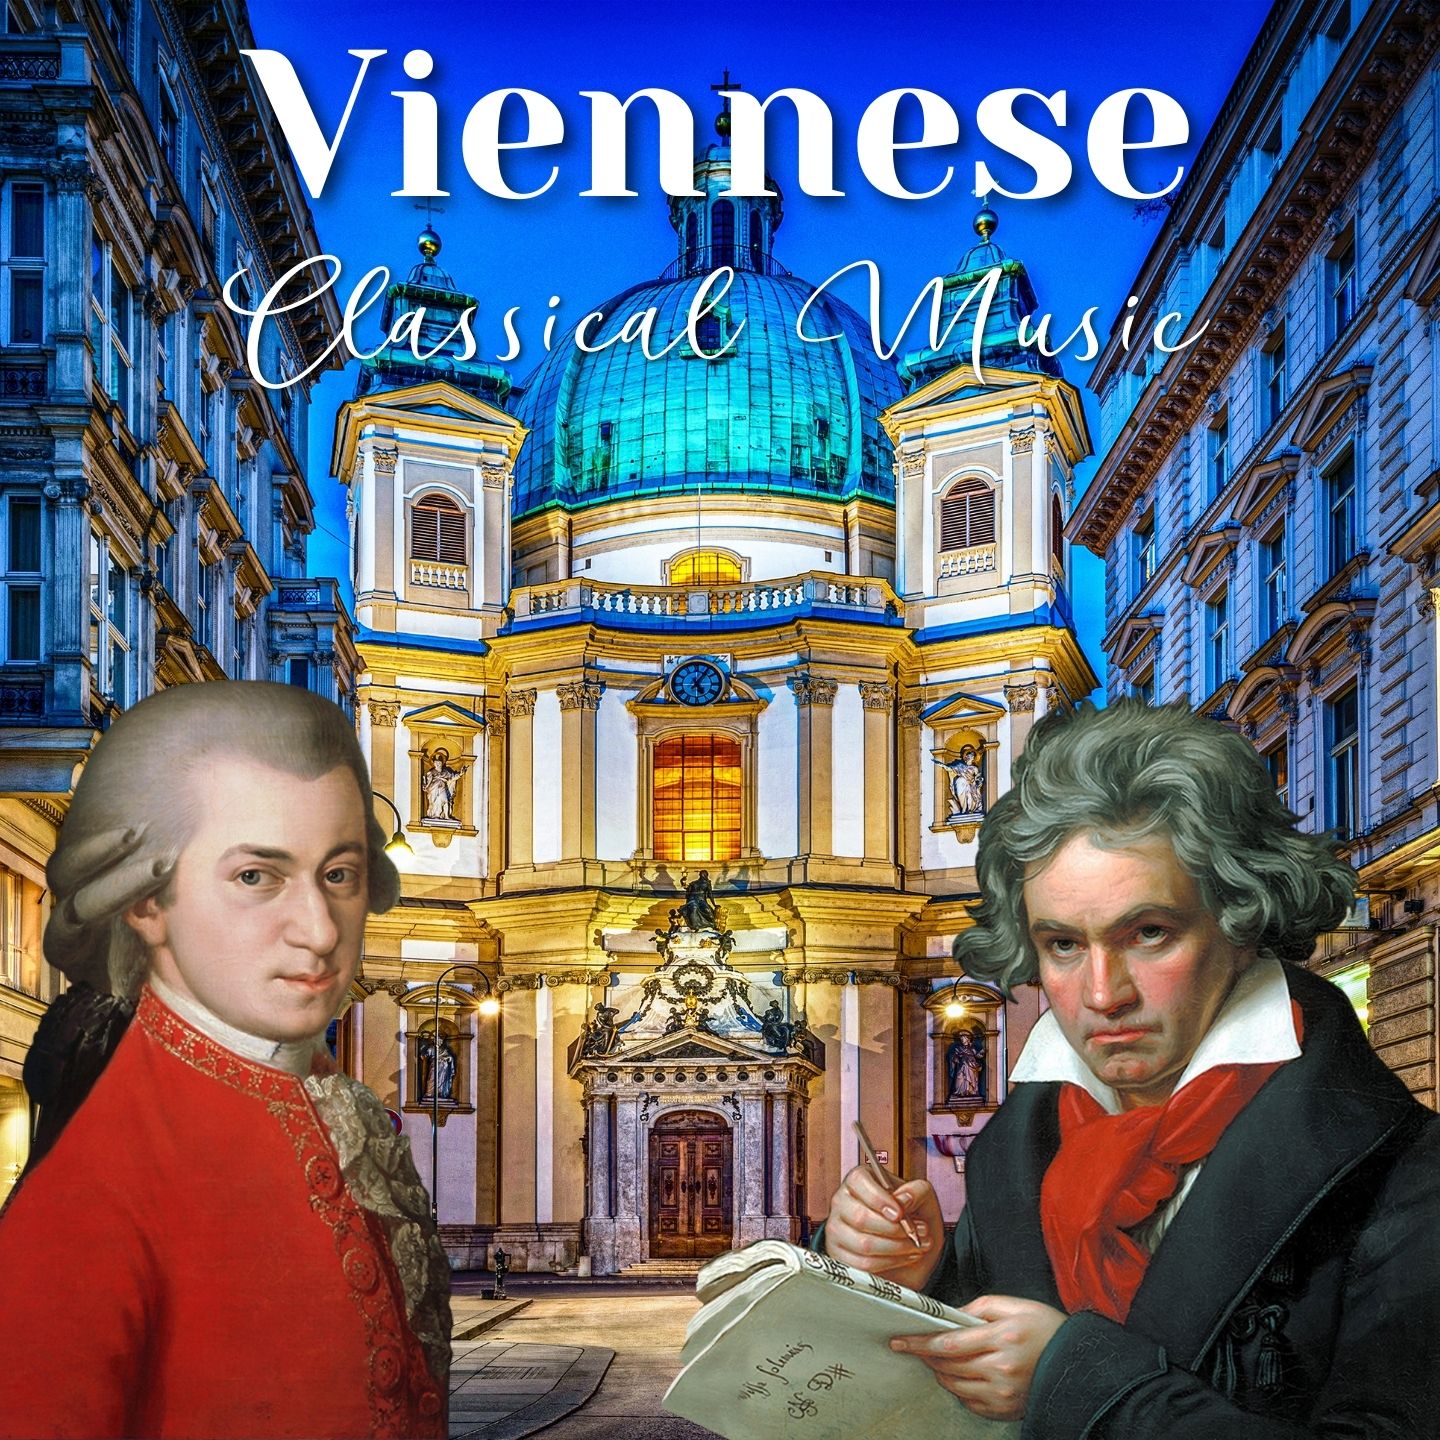 Viennese Classical Music